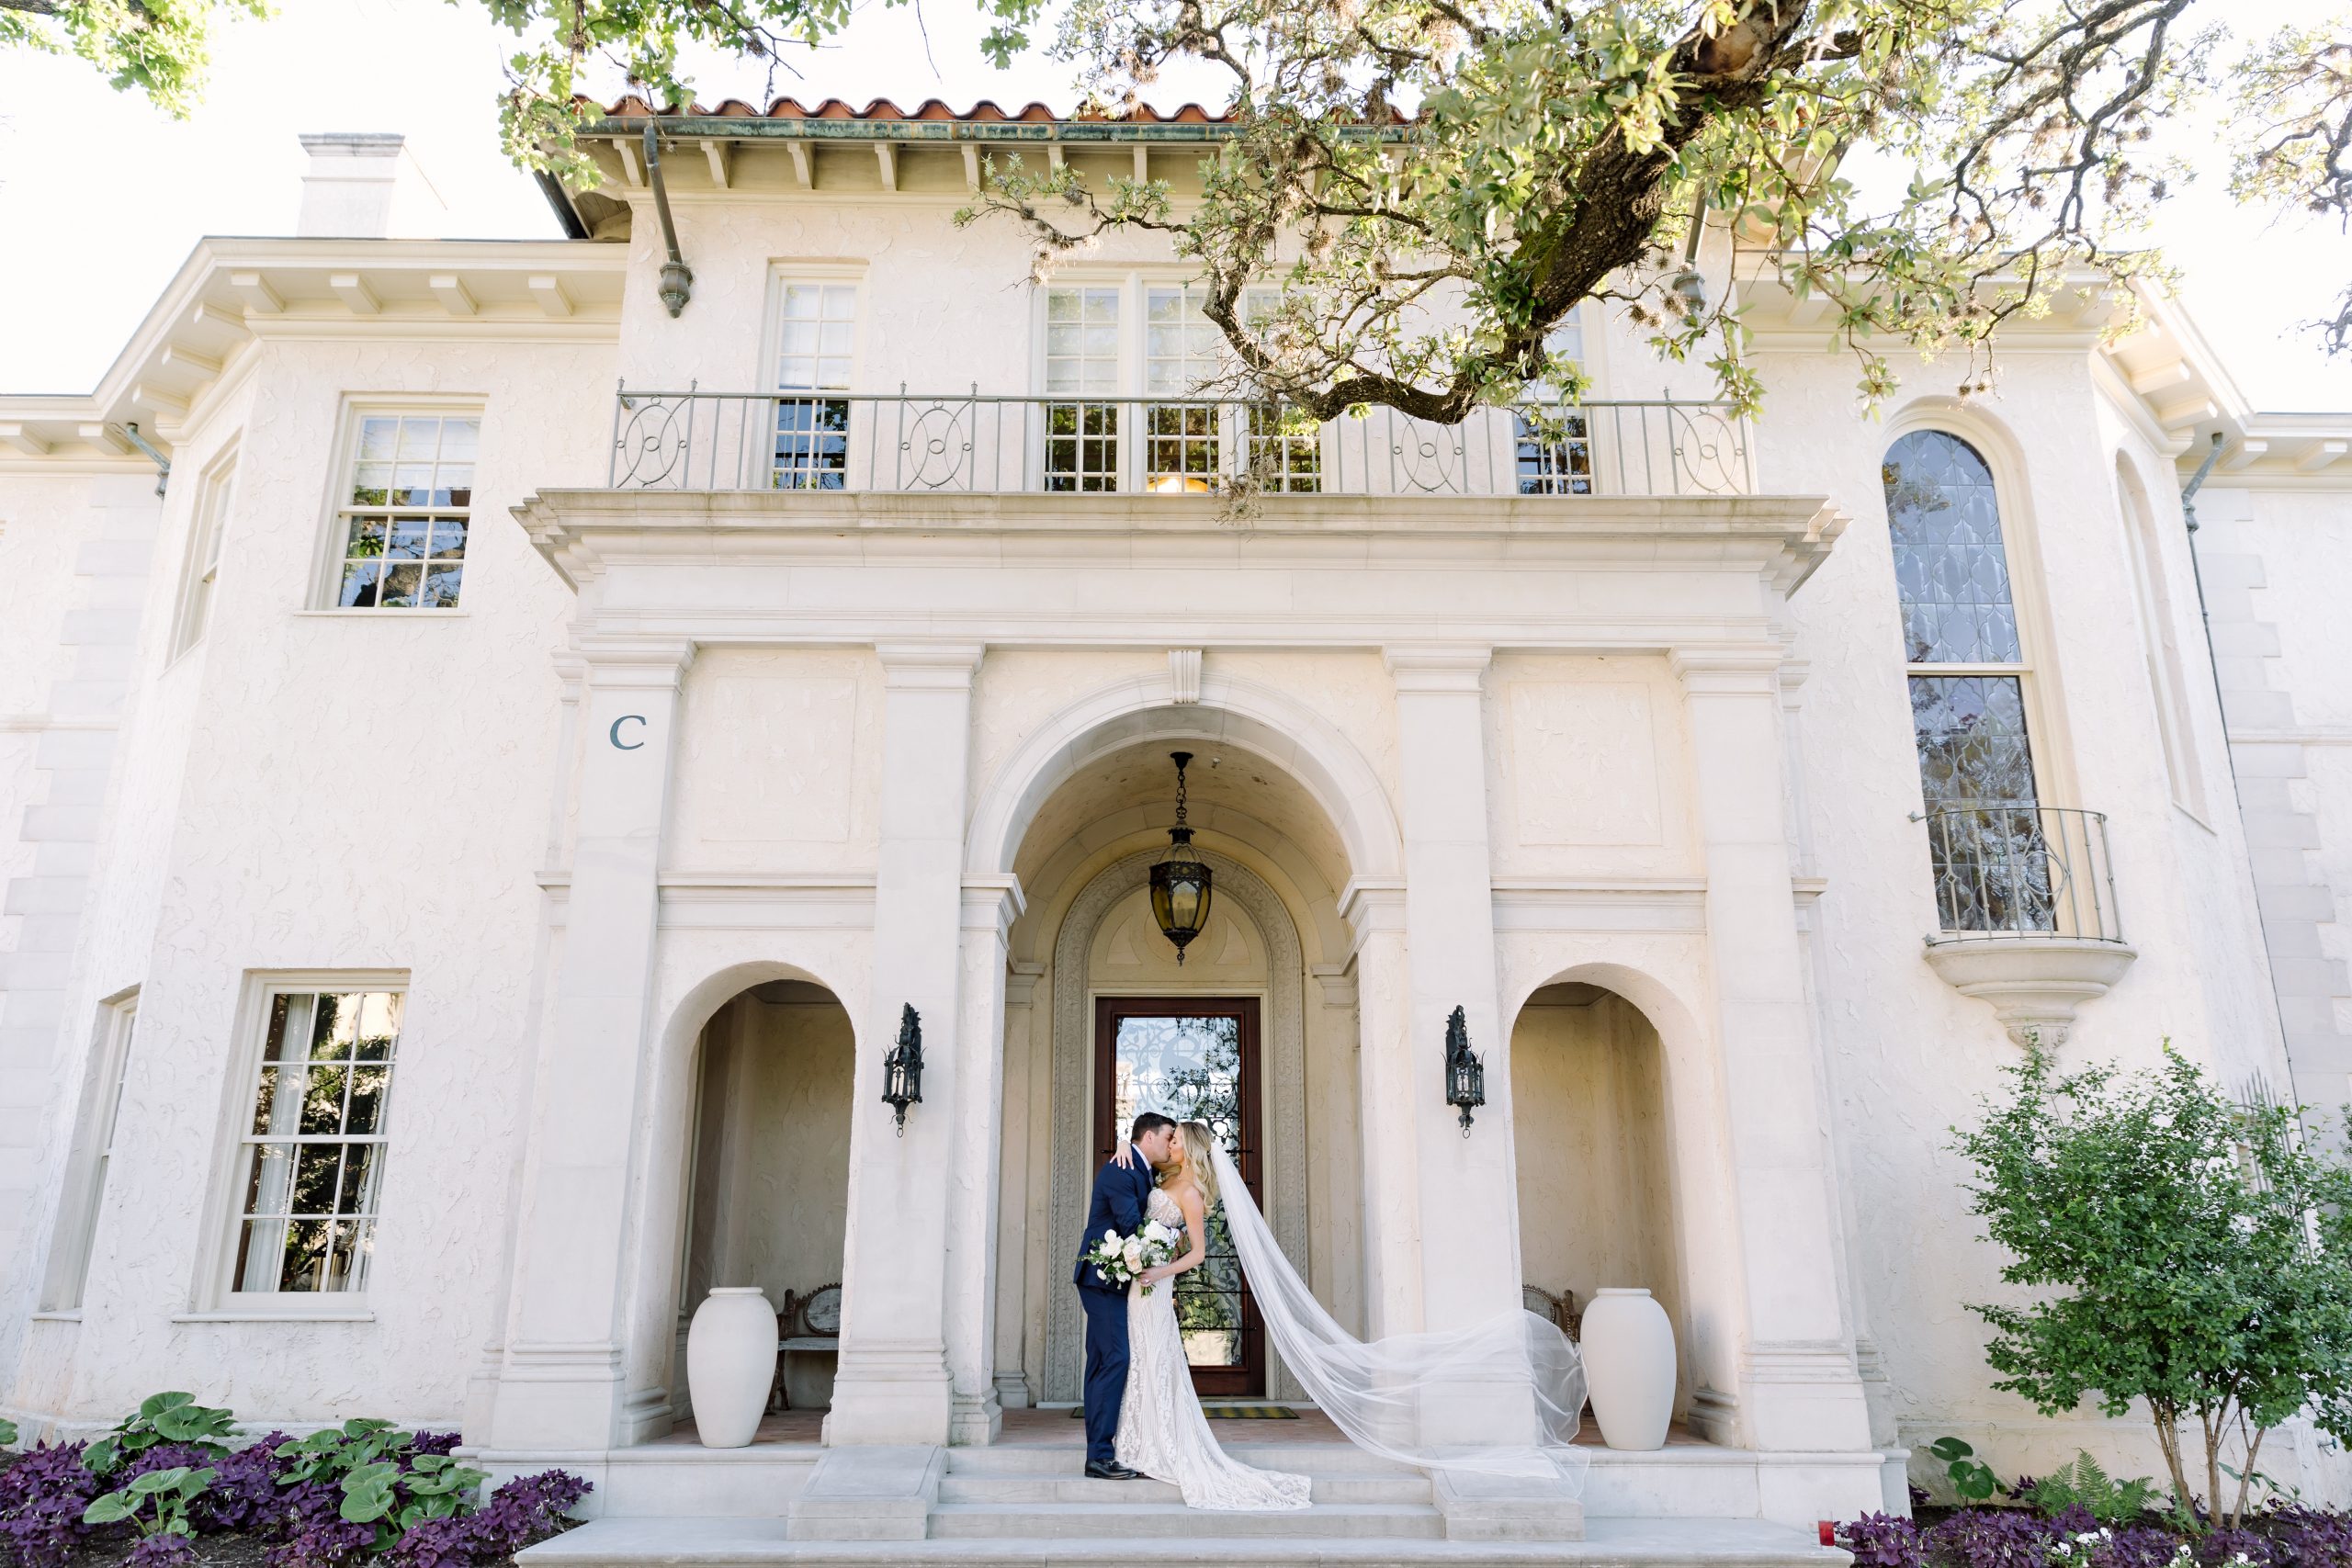 Commodore Perry Estate - Top Downtown Austin Wedding Venues | Julie Wilhite Photography